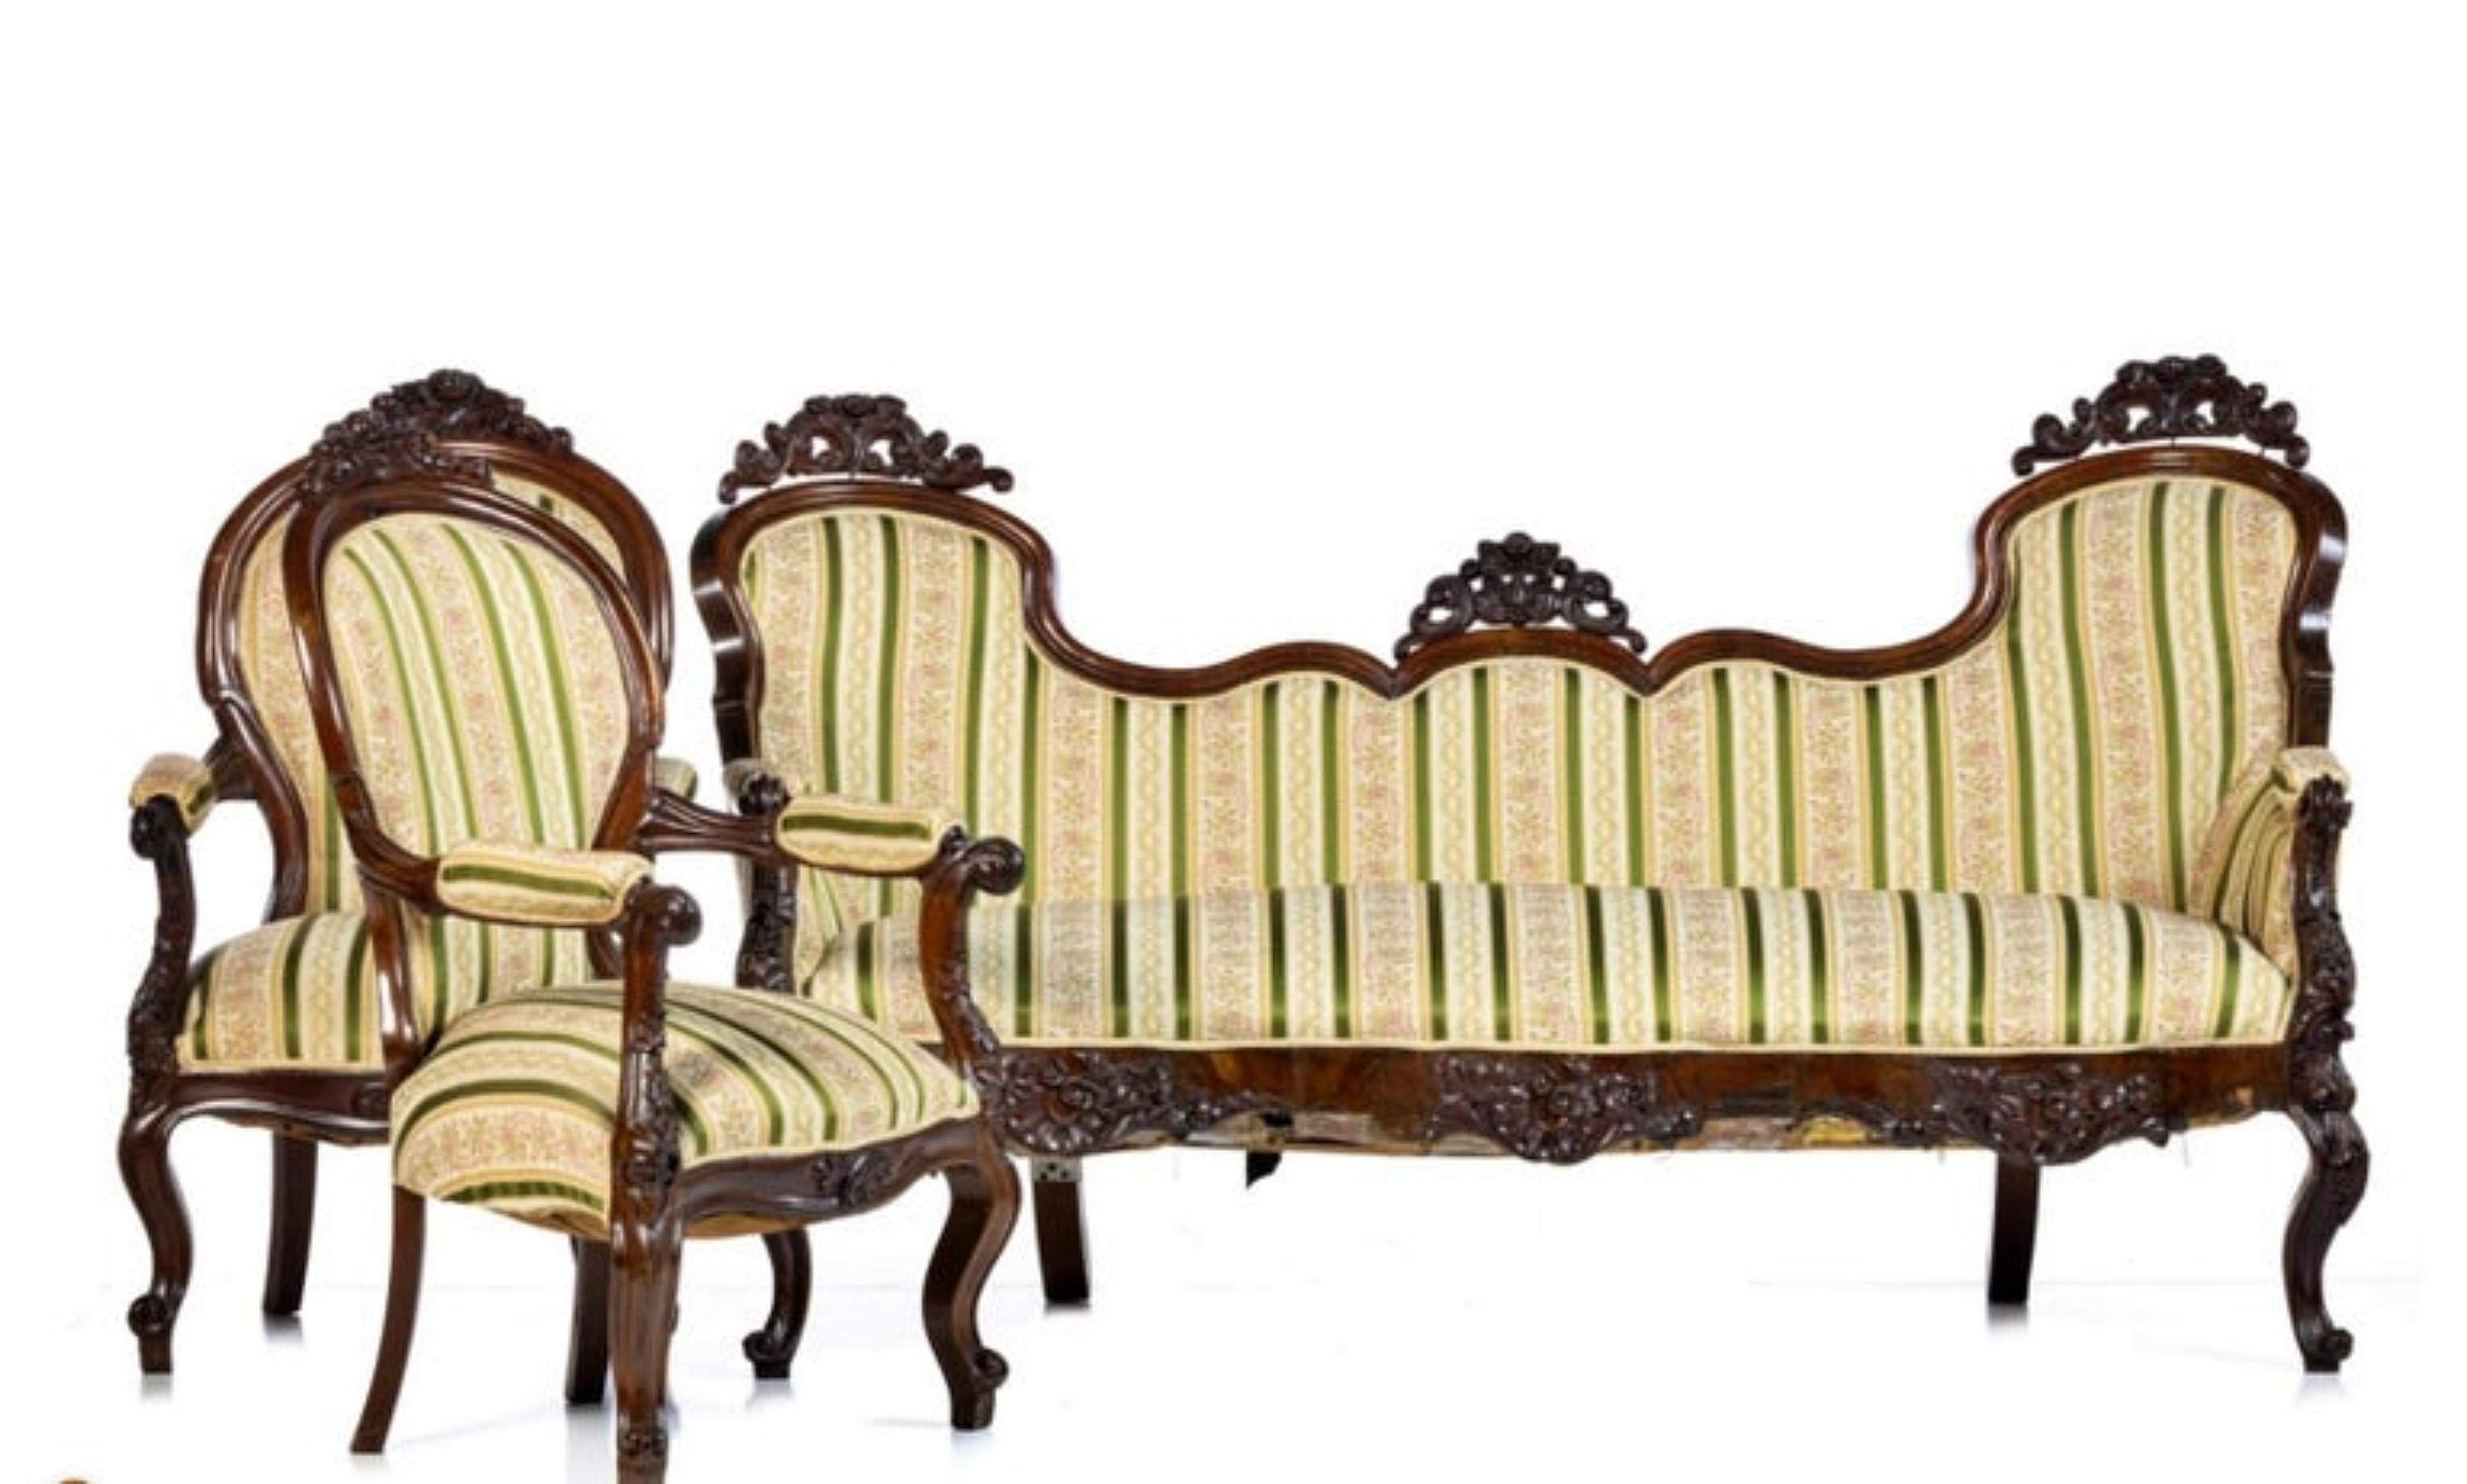 19th century SET CANAPE AND TWO ARMCHAIRS

in carved oilwood, decorated with plant motifs.
Upholstered seats, back and armrests.
Usage signs.
DIM.: (settee) 116 x 182 x 60 cm (armchairs) 118 x 69 x 50 cm.
good condition.